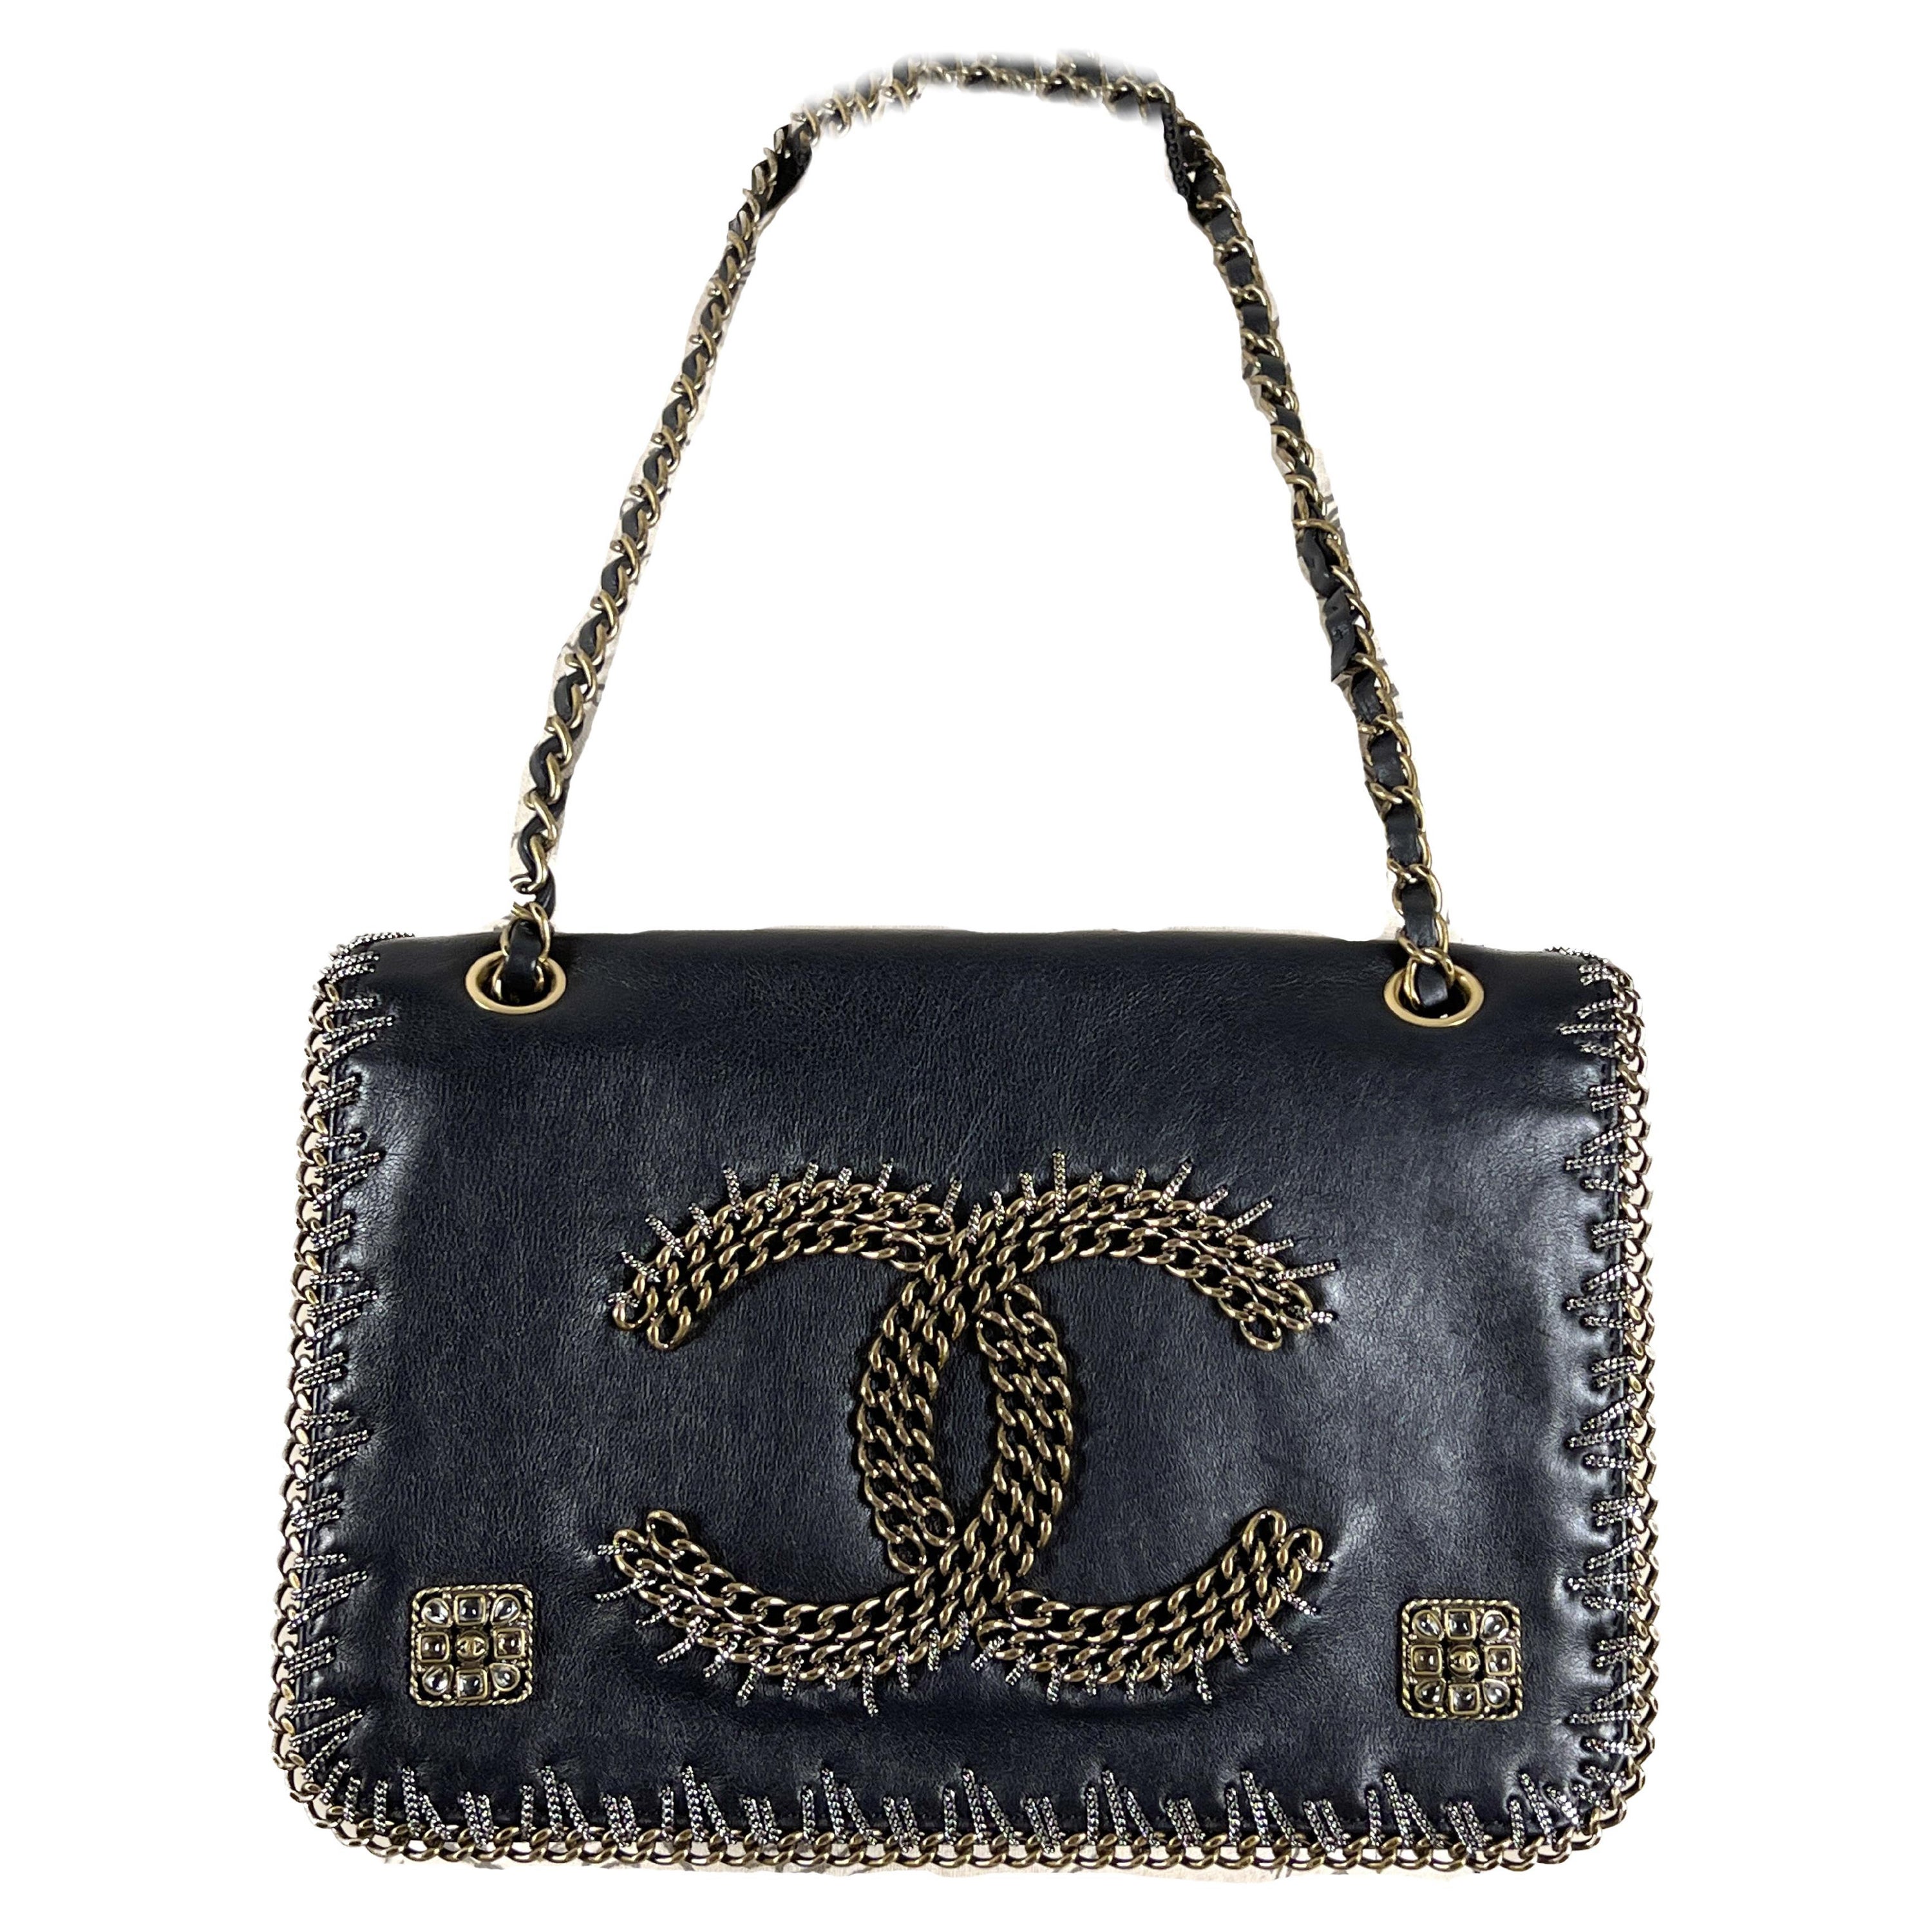 Chanel Extremely Rare Chain Trim Paris / Byzance Flap Bag For Sale